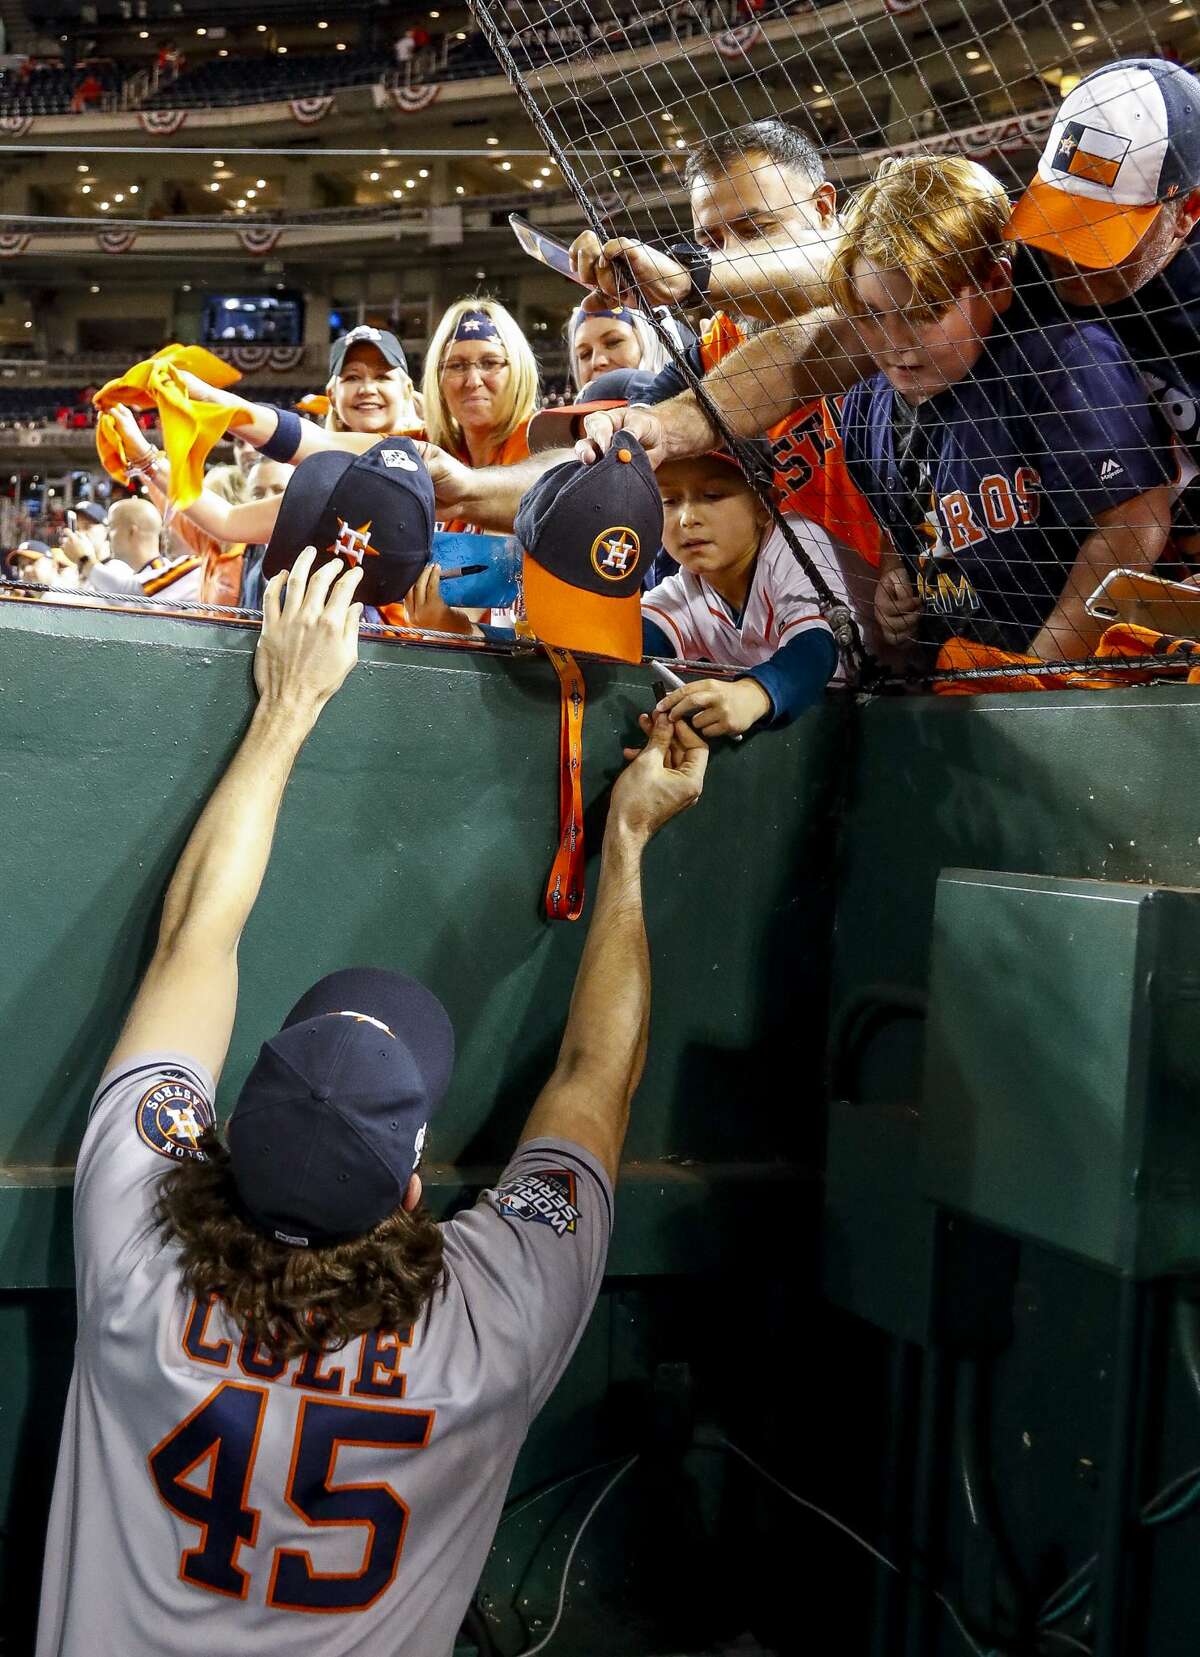 Houston Astros starting pitcher Gerrit Cole (45) signs autographs for fans after the Astros won Game 5 of the World Series 7-1 at Nationals Park in Washington, D.C. on Sunday, Oct. 27, 2019.